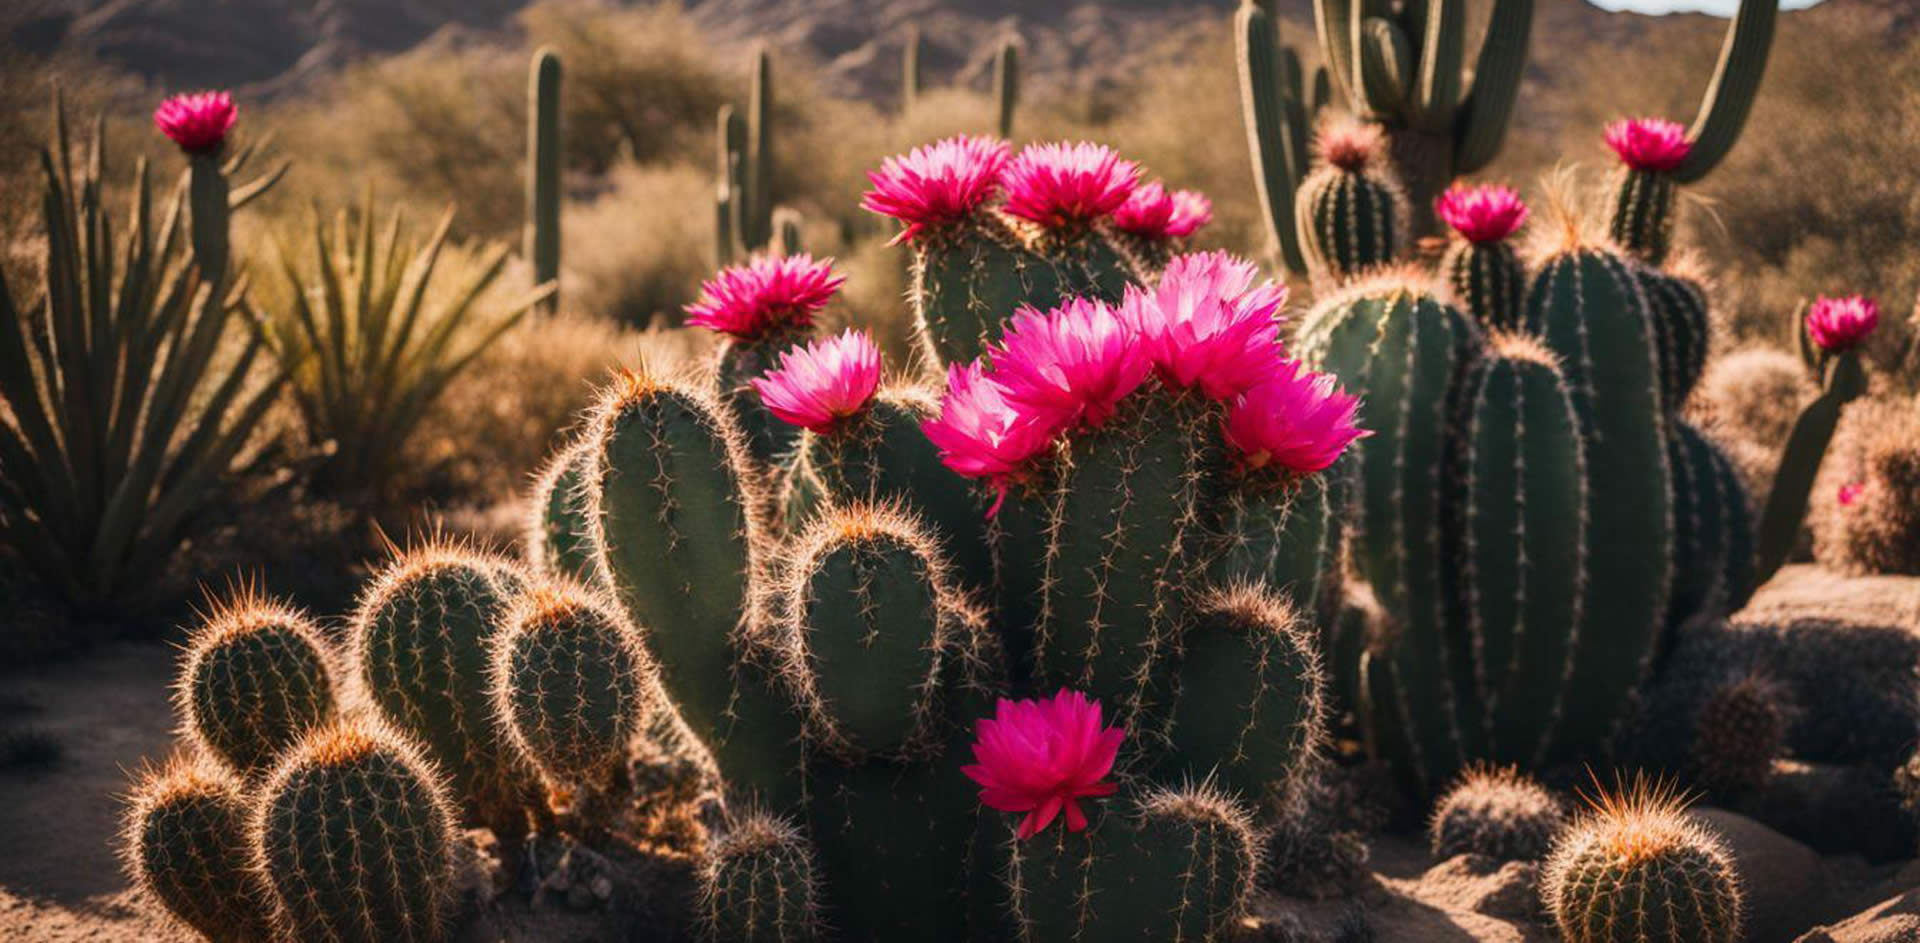 A group of cactus with pink flowers